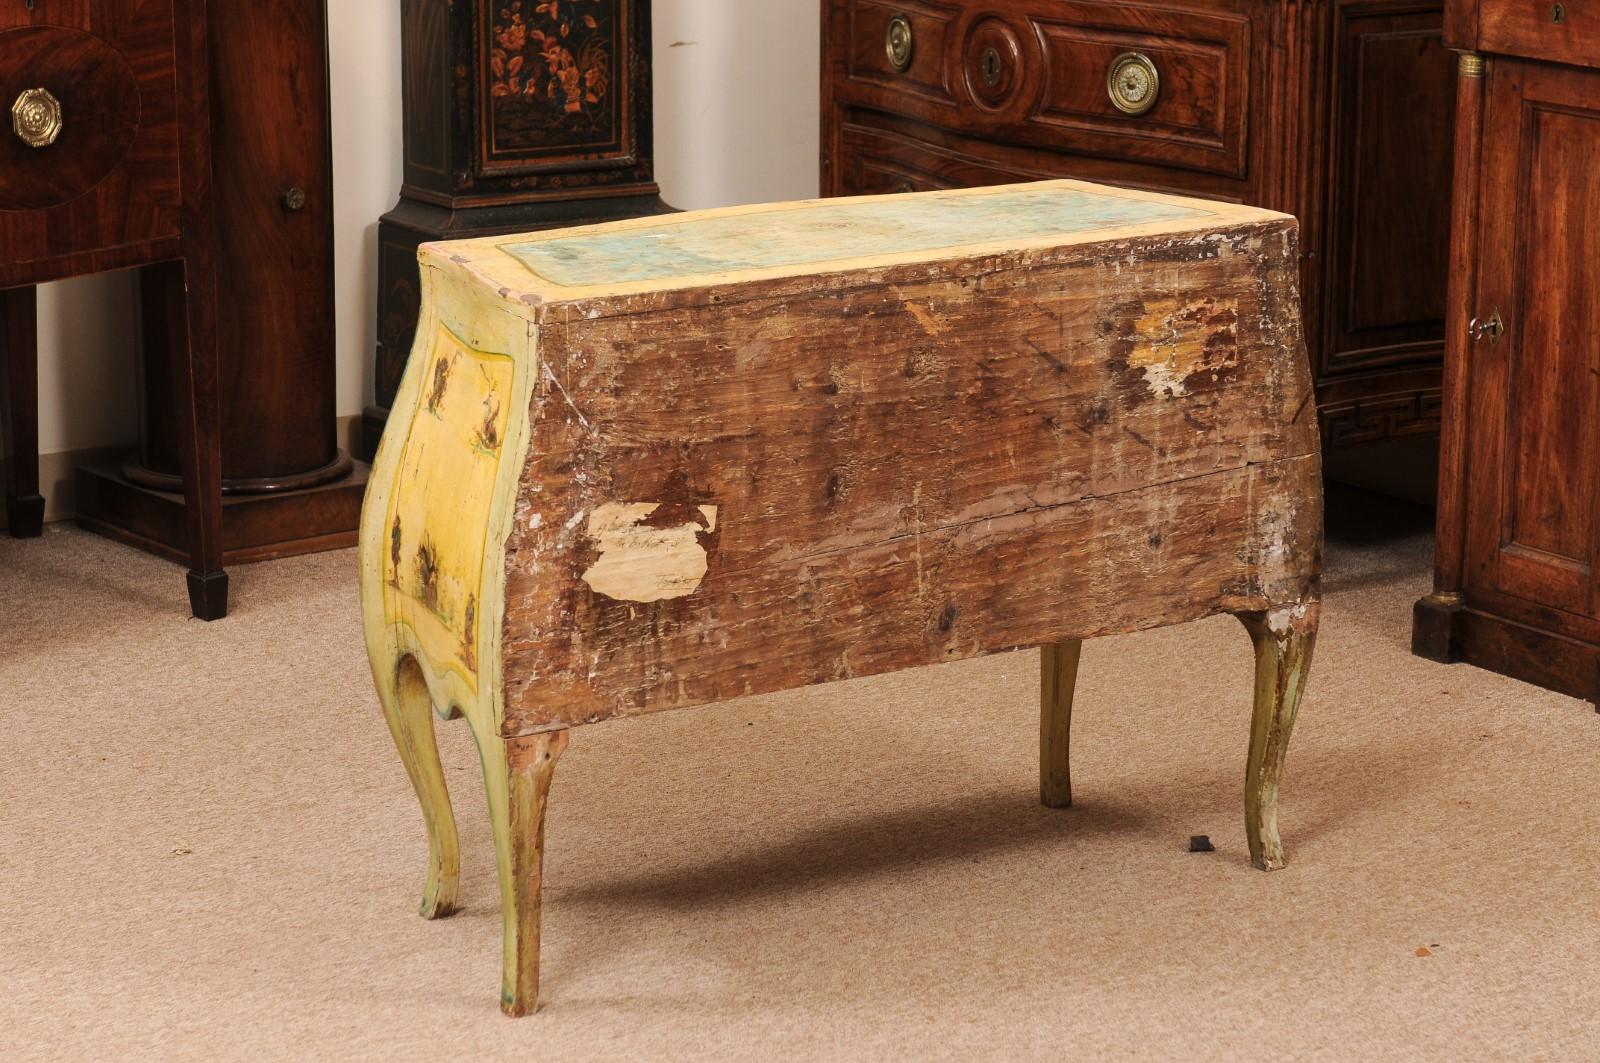  18th Century Italian Venetian Painted Yellow Commode with Decoupage Decoration  For Sale 4